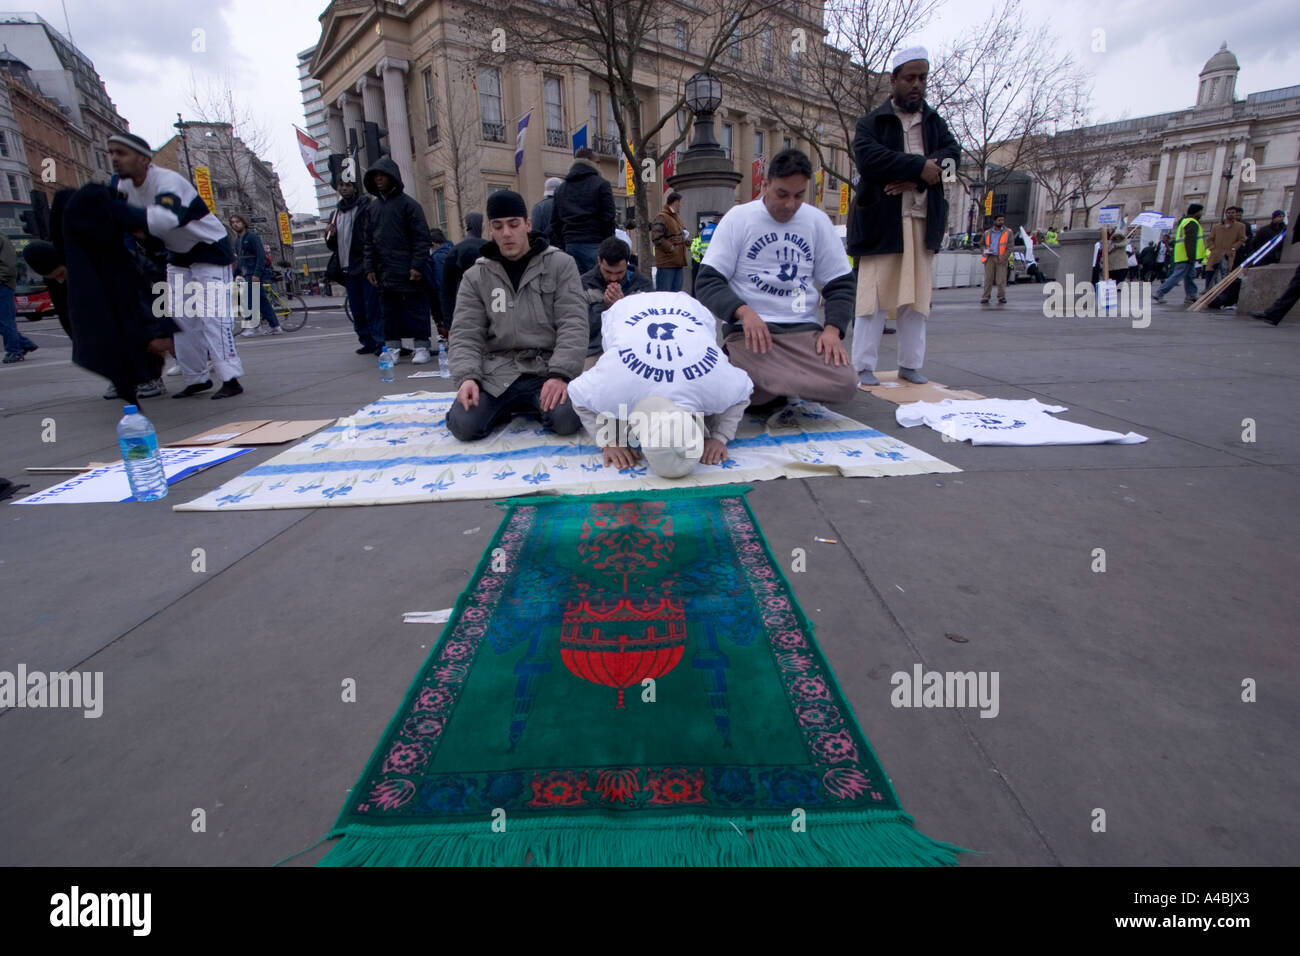 Praying islamic protesters meeting  Trafalgar square demonstrate about islamophobia after publication of cartoon in Danish paper Stock Photo